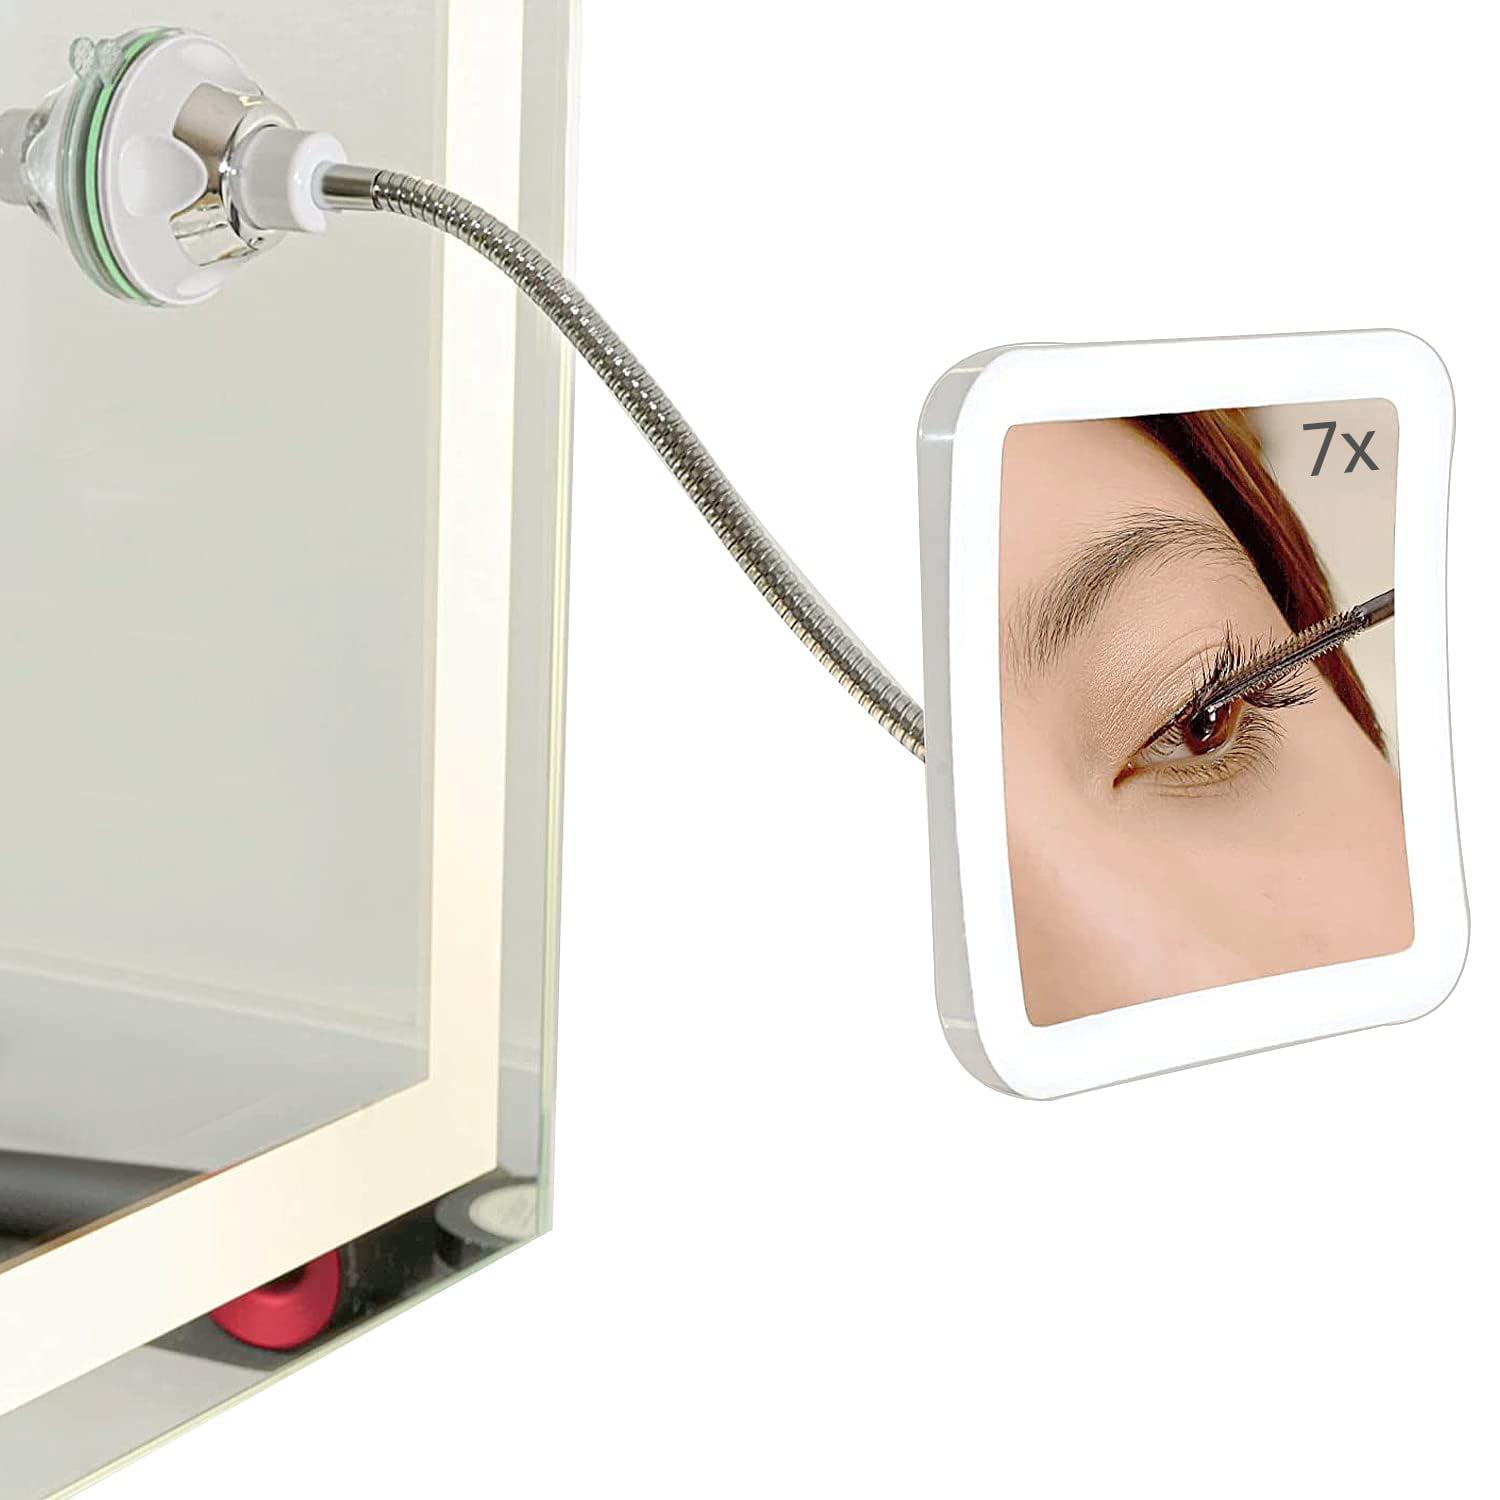 7X Magnification LED Lighted Makeup Mirror with Flexible Gooseneck